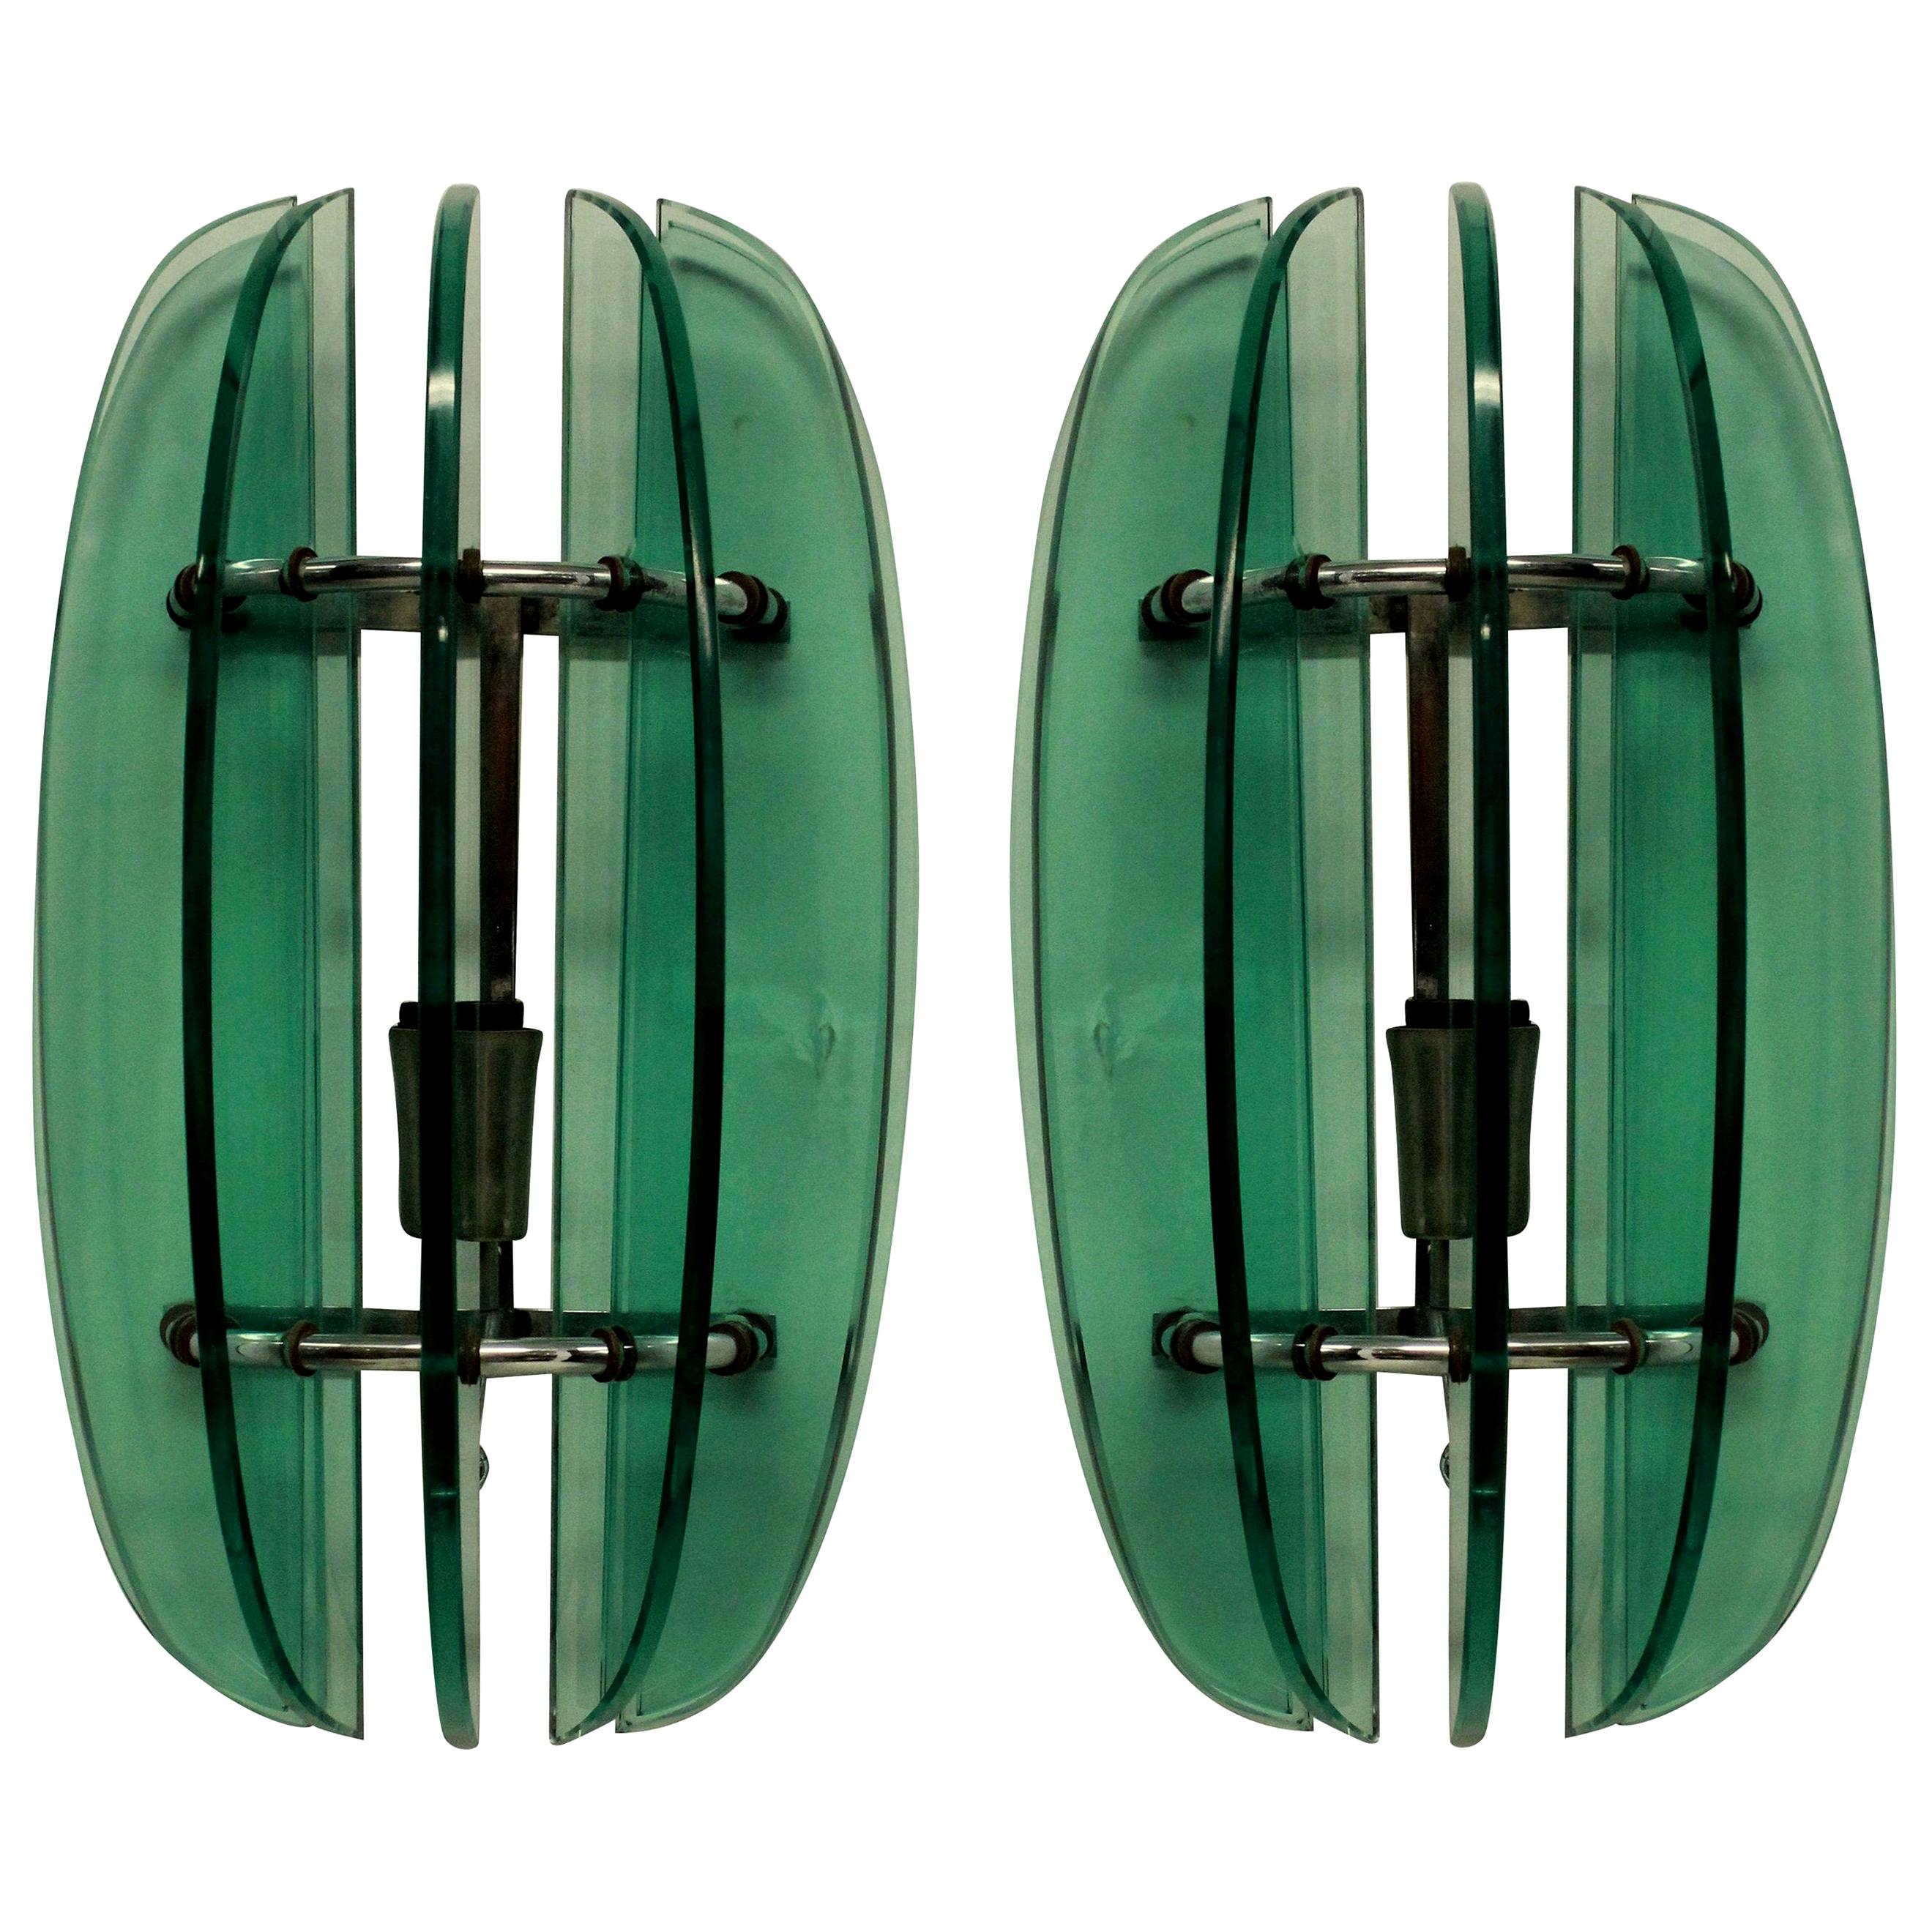 Pair of Green Wall Lights by Veca